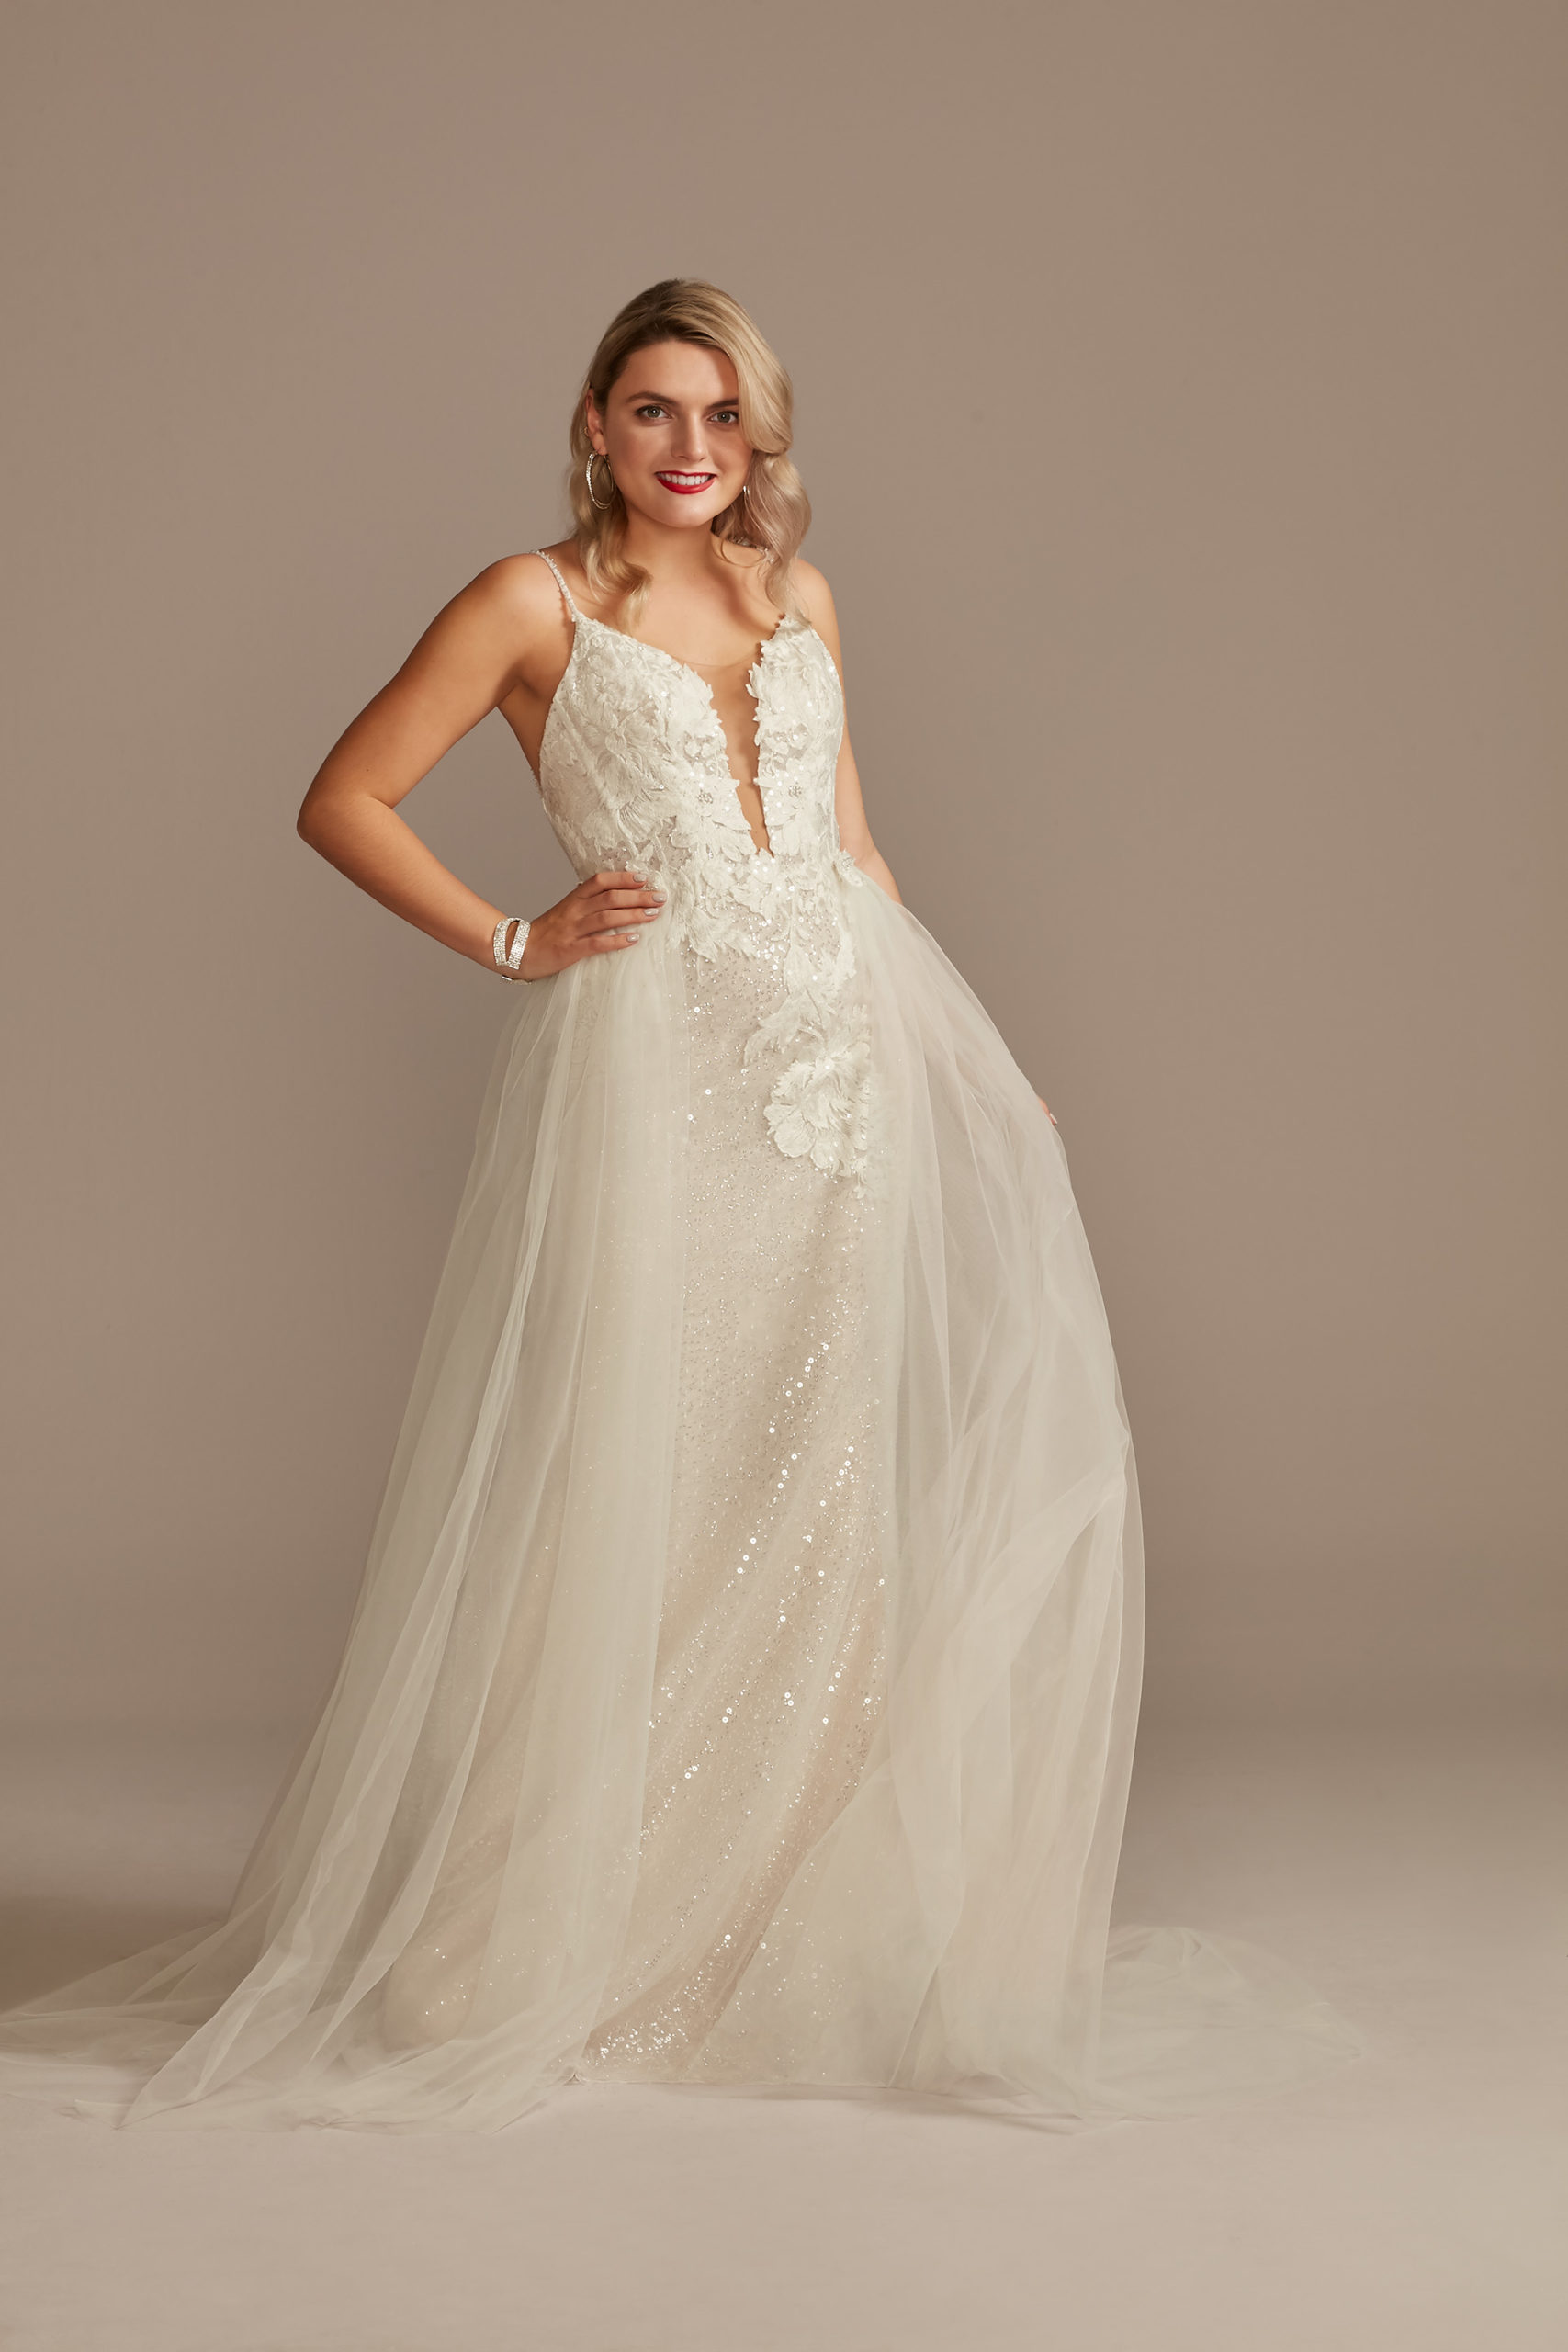 bride wearing Sequin Applique ethereal Wedding Dress with Removable Train